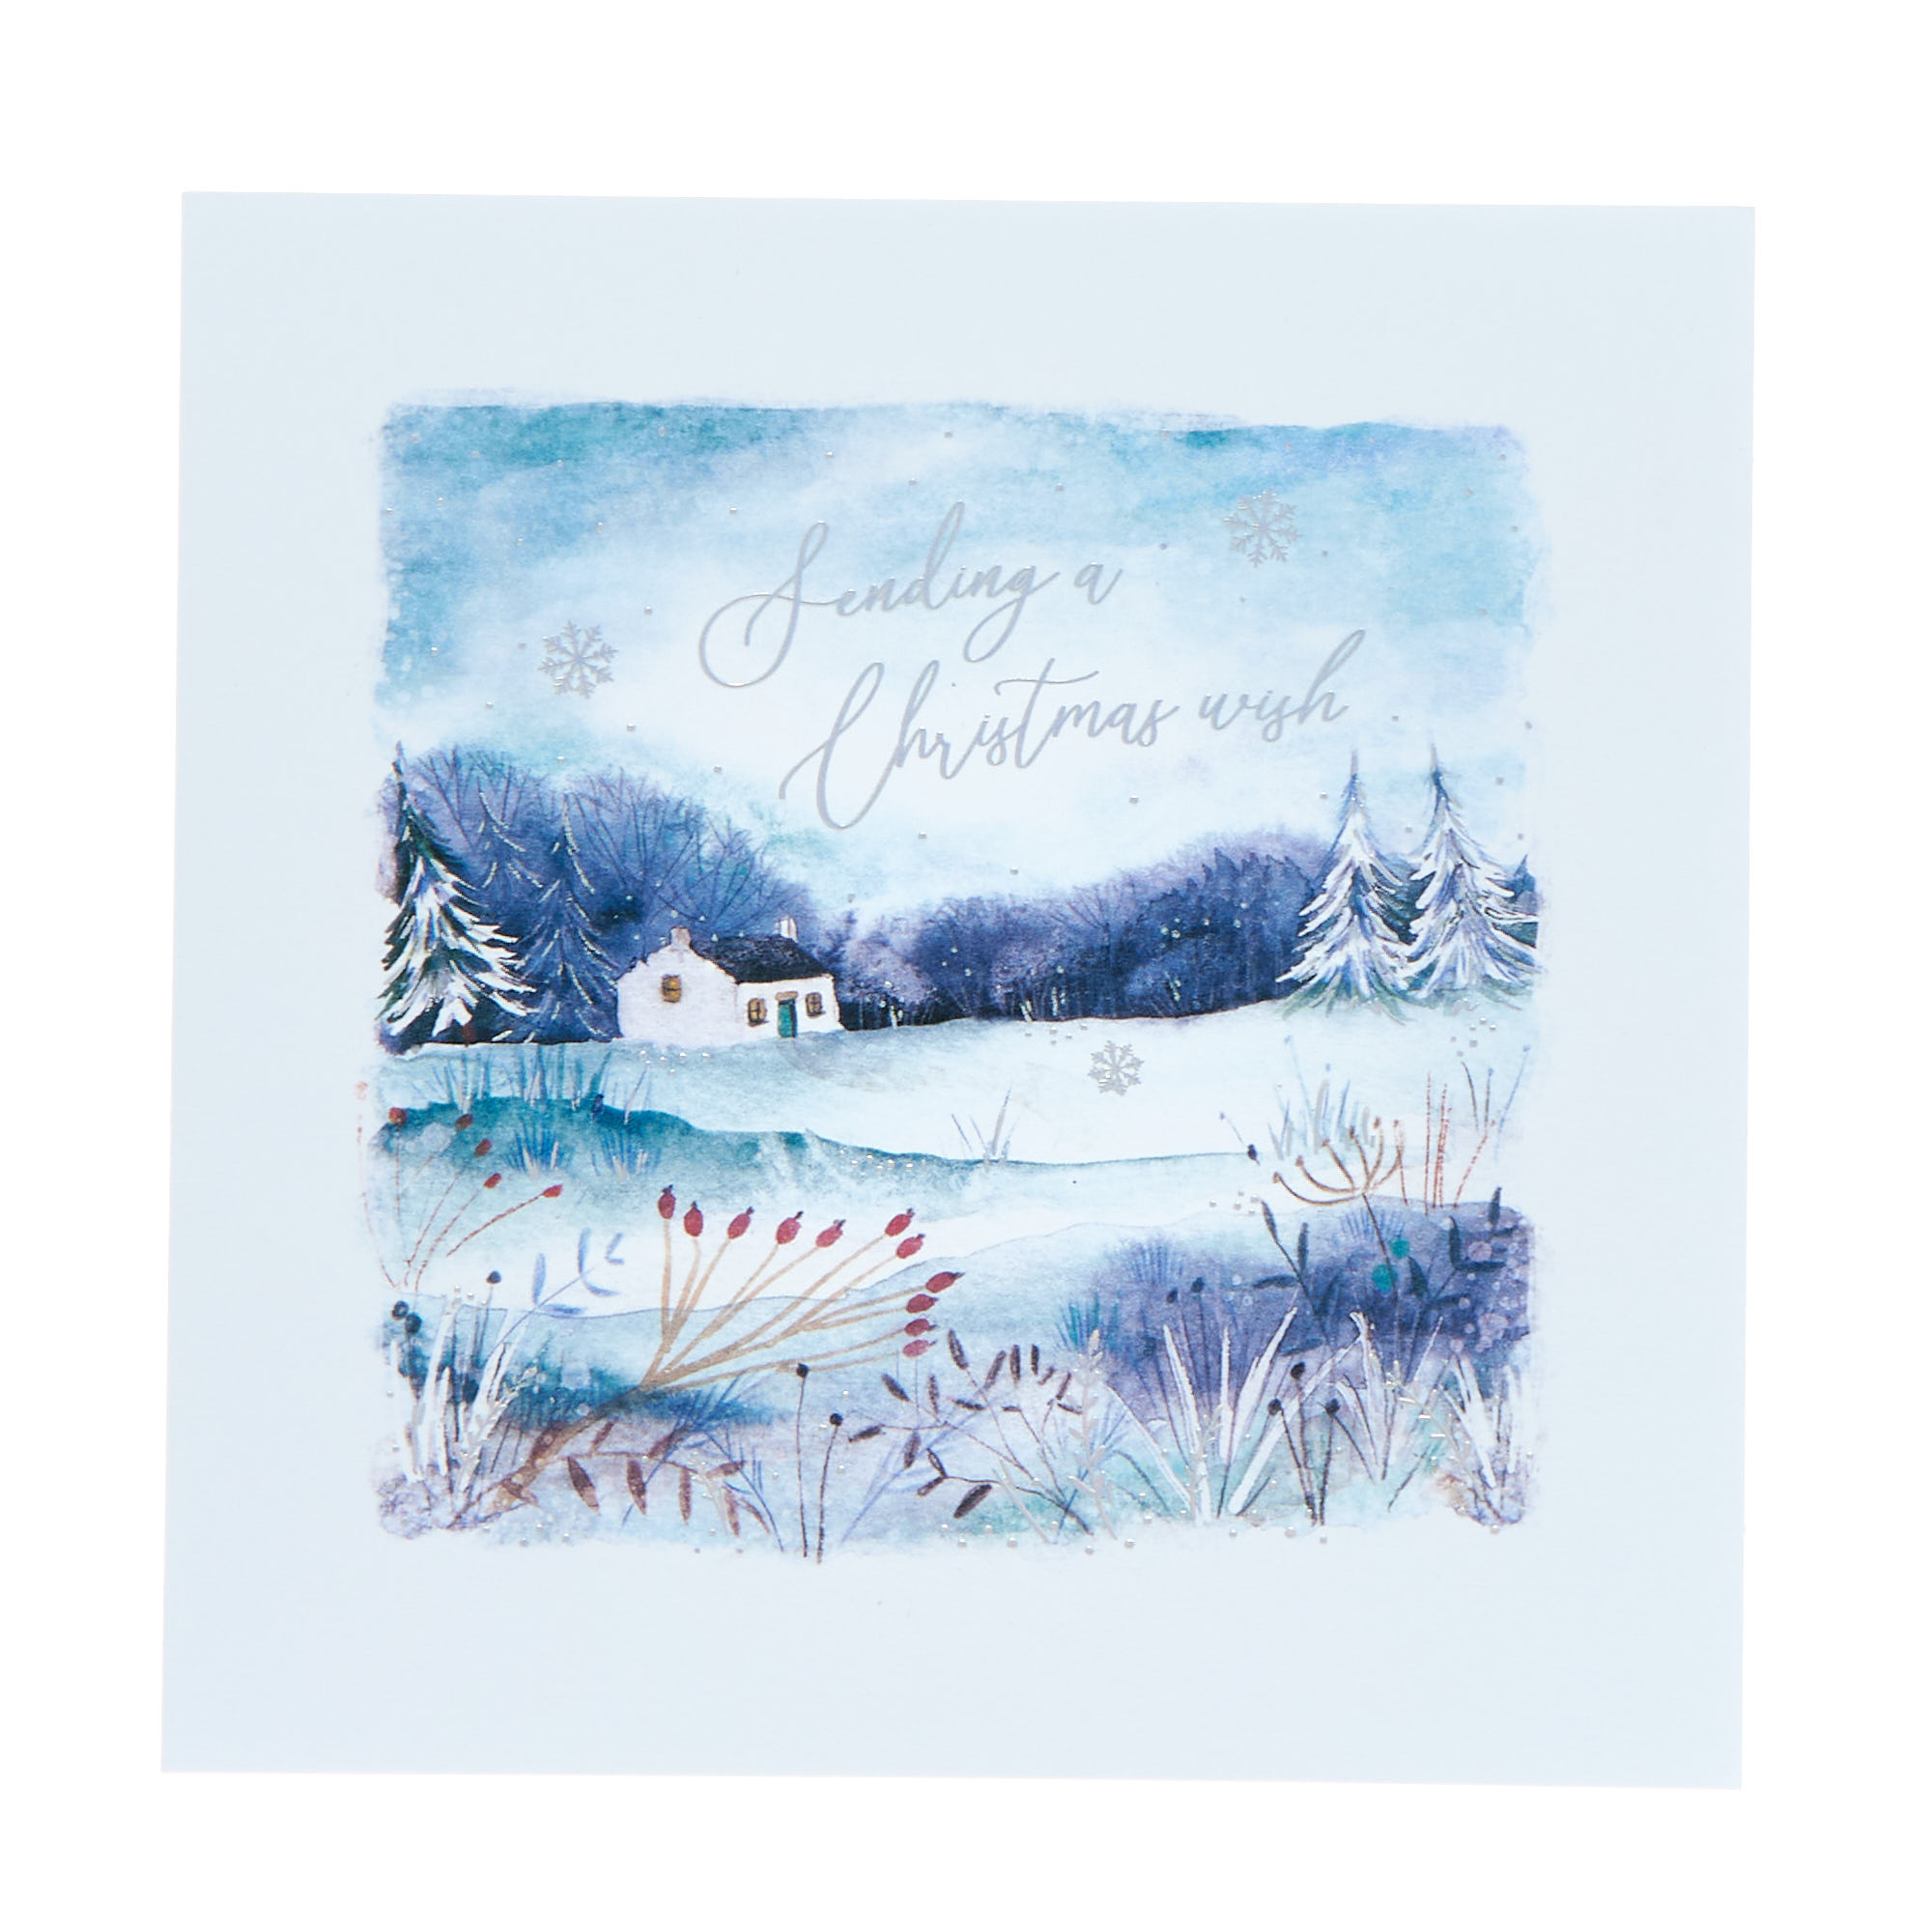 18 Charity Christmas Cards - Snowy Landscapes (2 Designs)